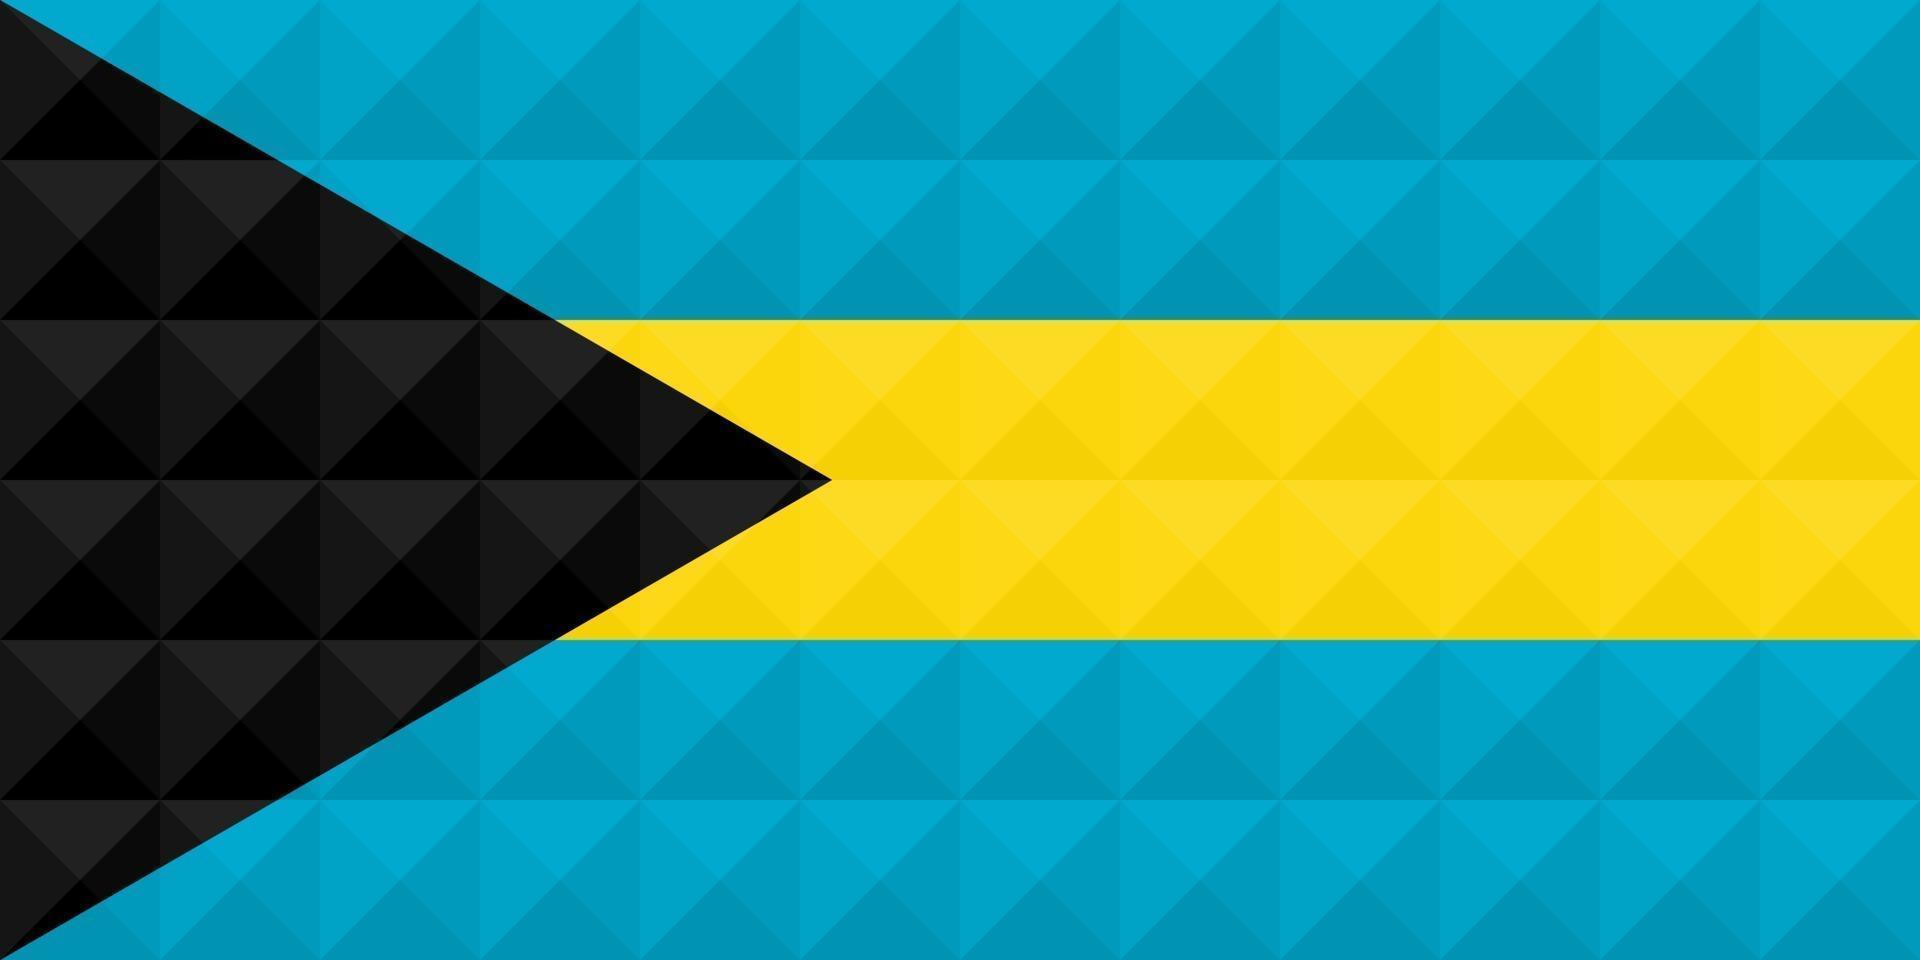 Artistic flag of Bahamas with geometric wave concept art design vector